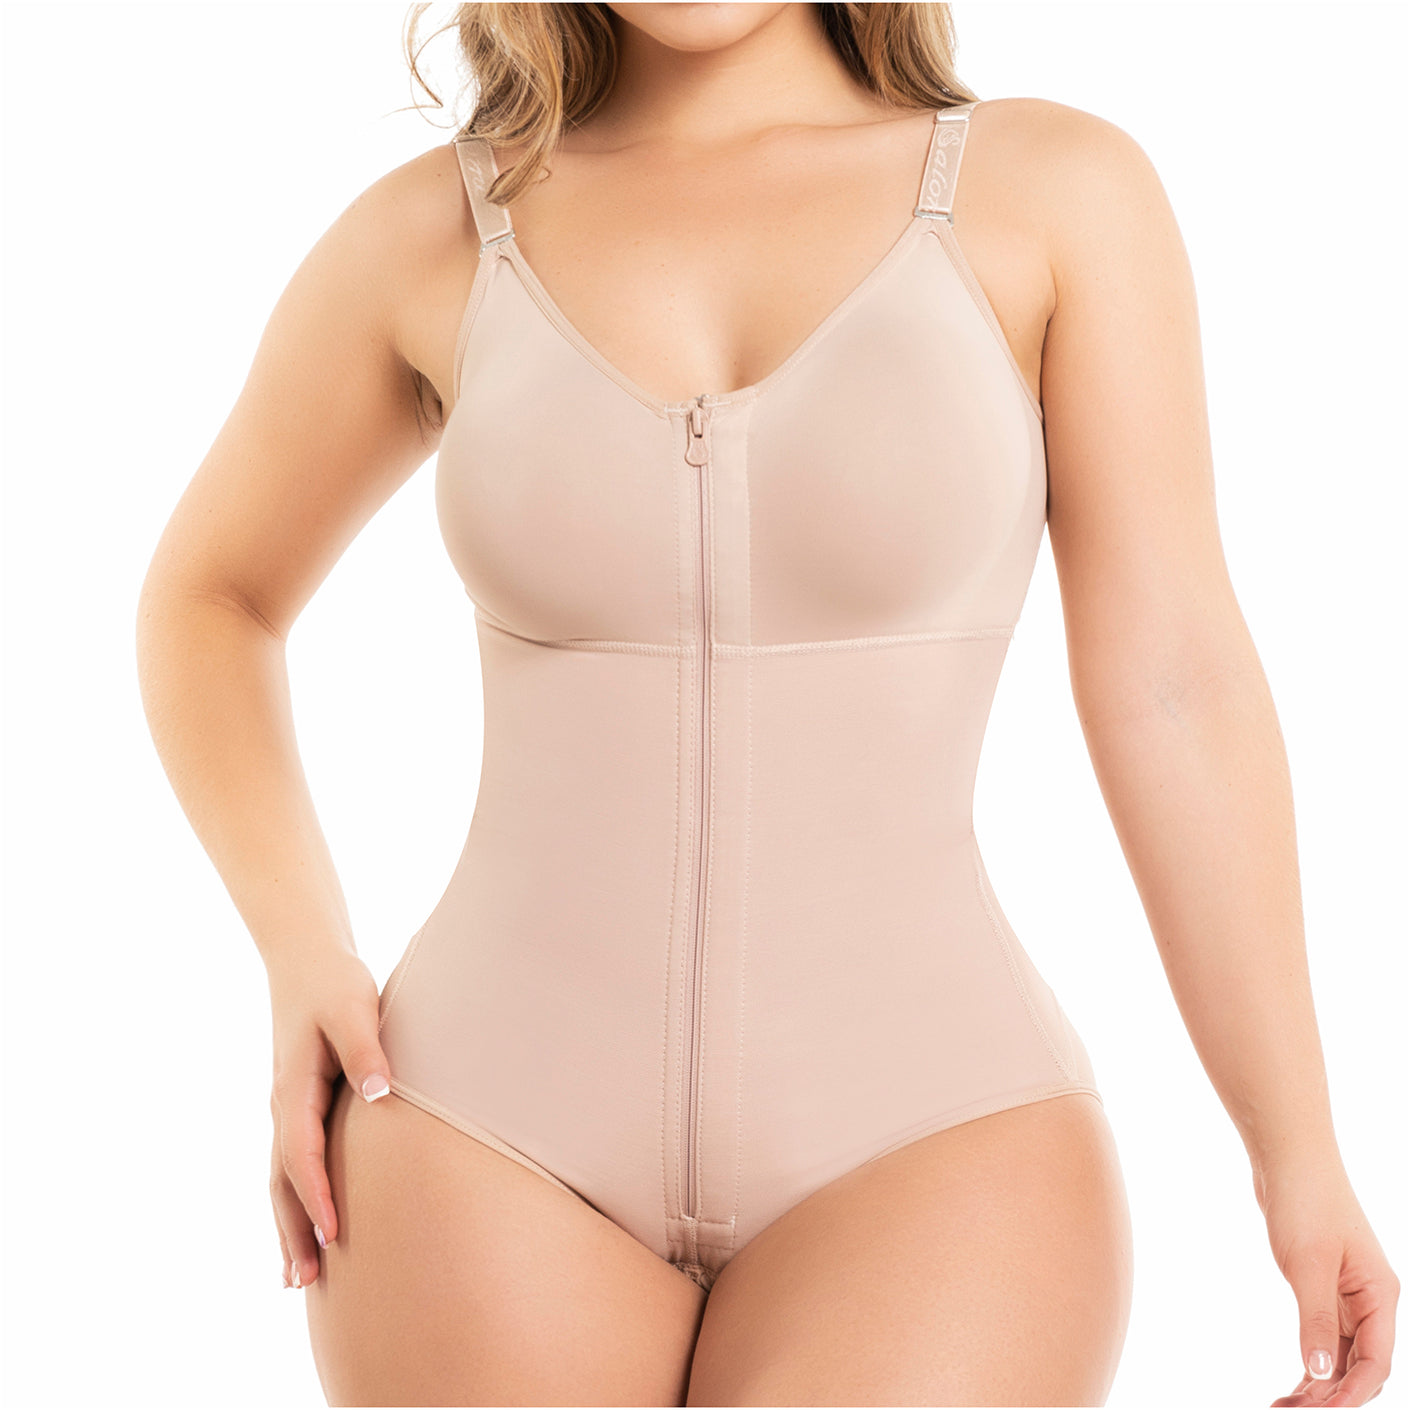 COLOMBIAN SHAPEWEAR IDEAL TO WORK OUT VEST WAIST CINCHER SALOME 0314